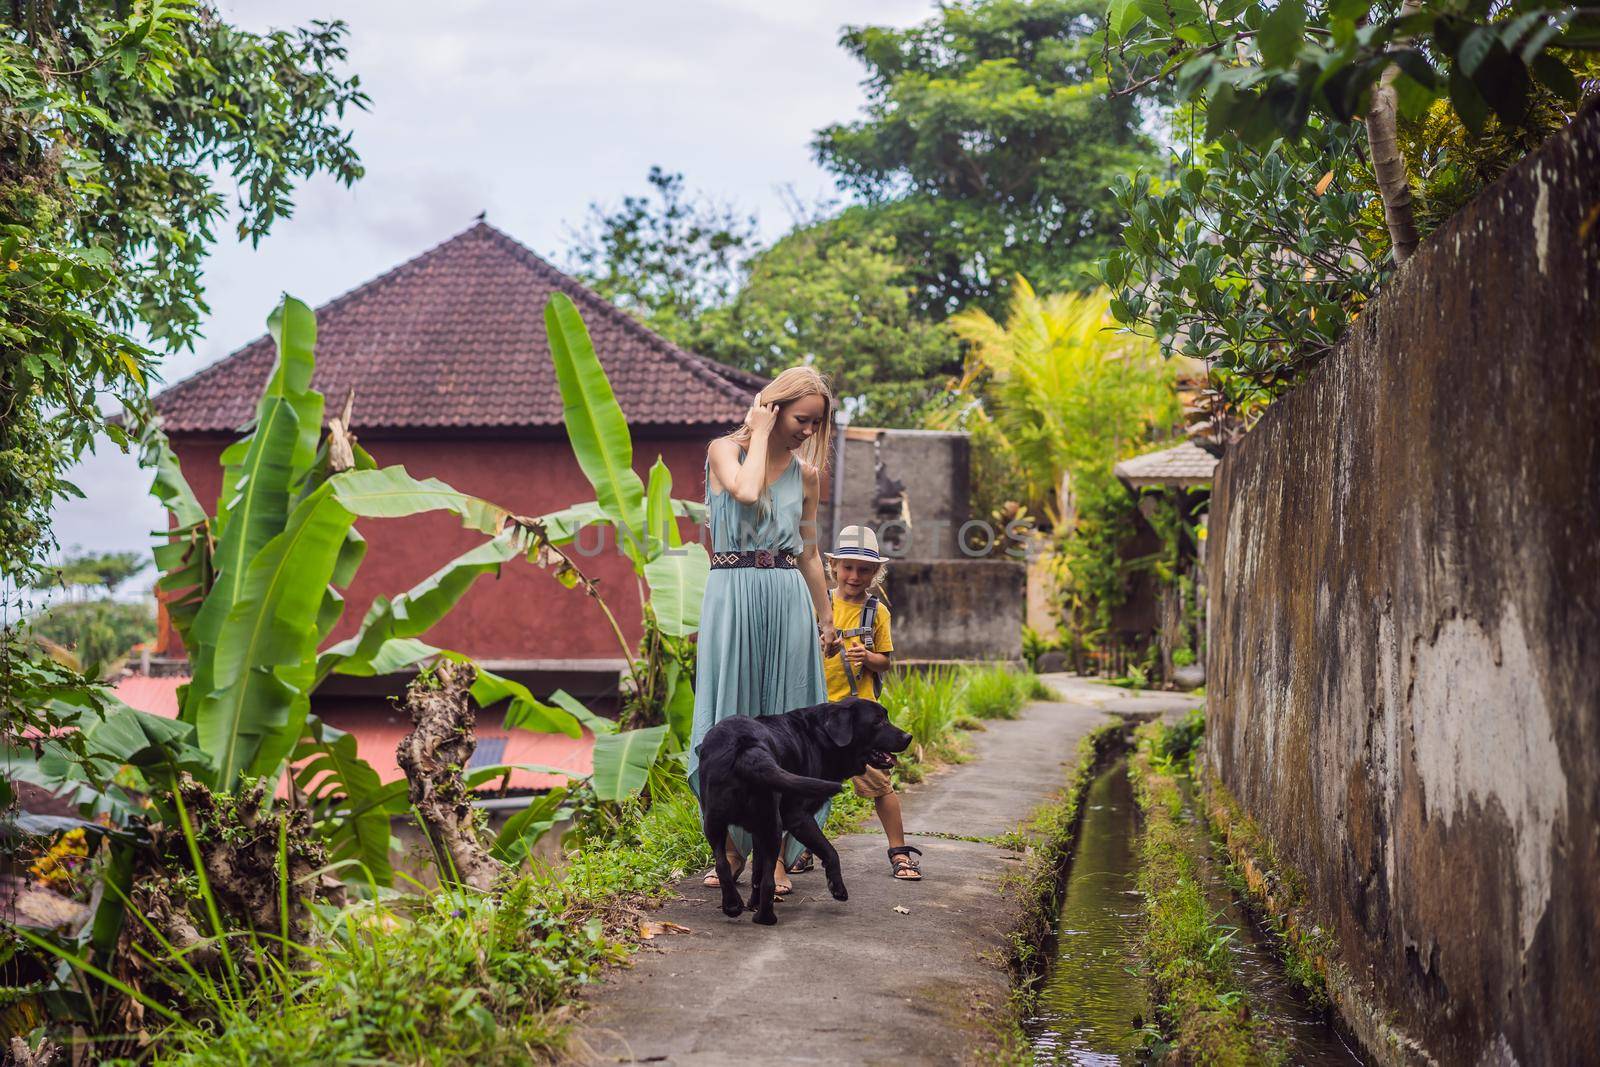 Bali dog. Mother and son tourists in Bali walks along the narrow cozy streets of Ubud. Bali is a popular tourist destination. Travel to Bali concept. Traveling with children concept by galitskaya